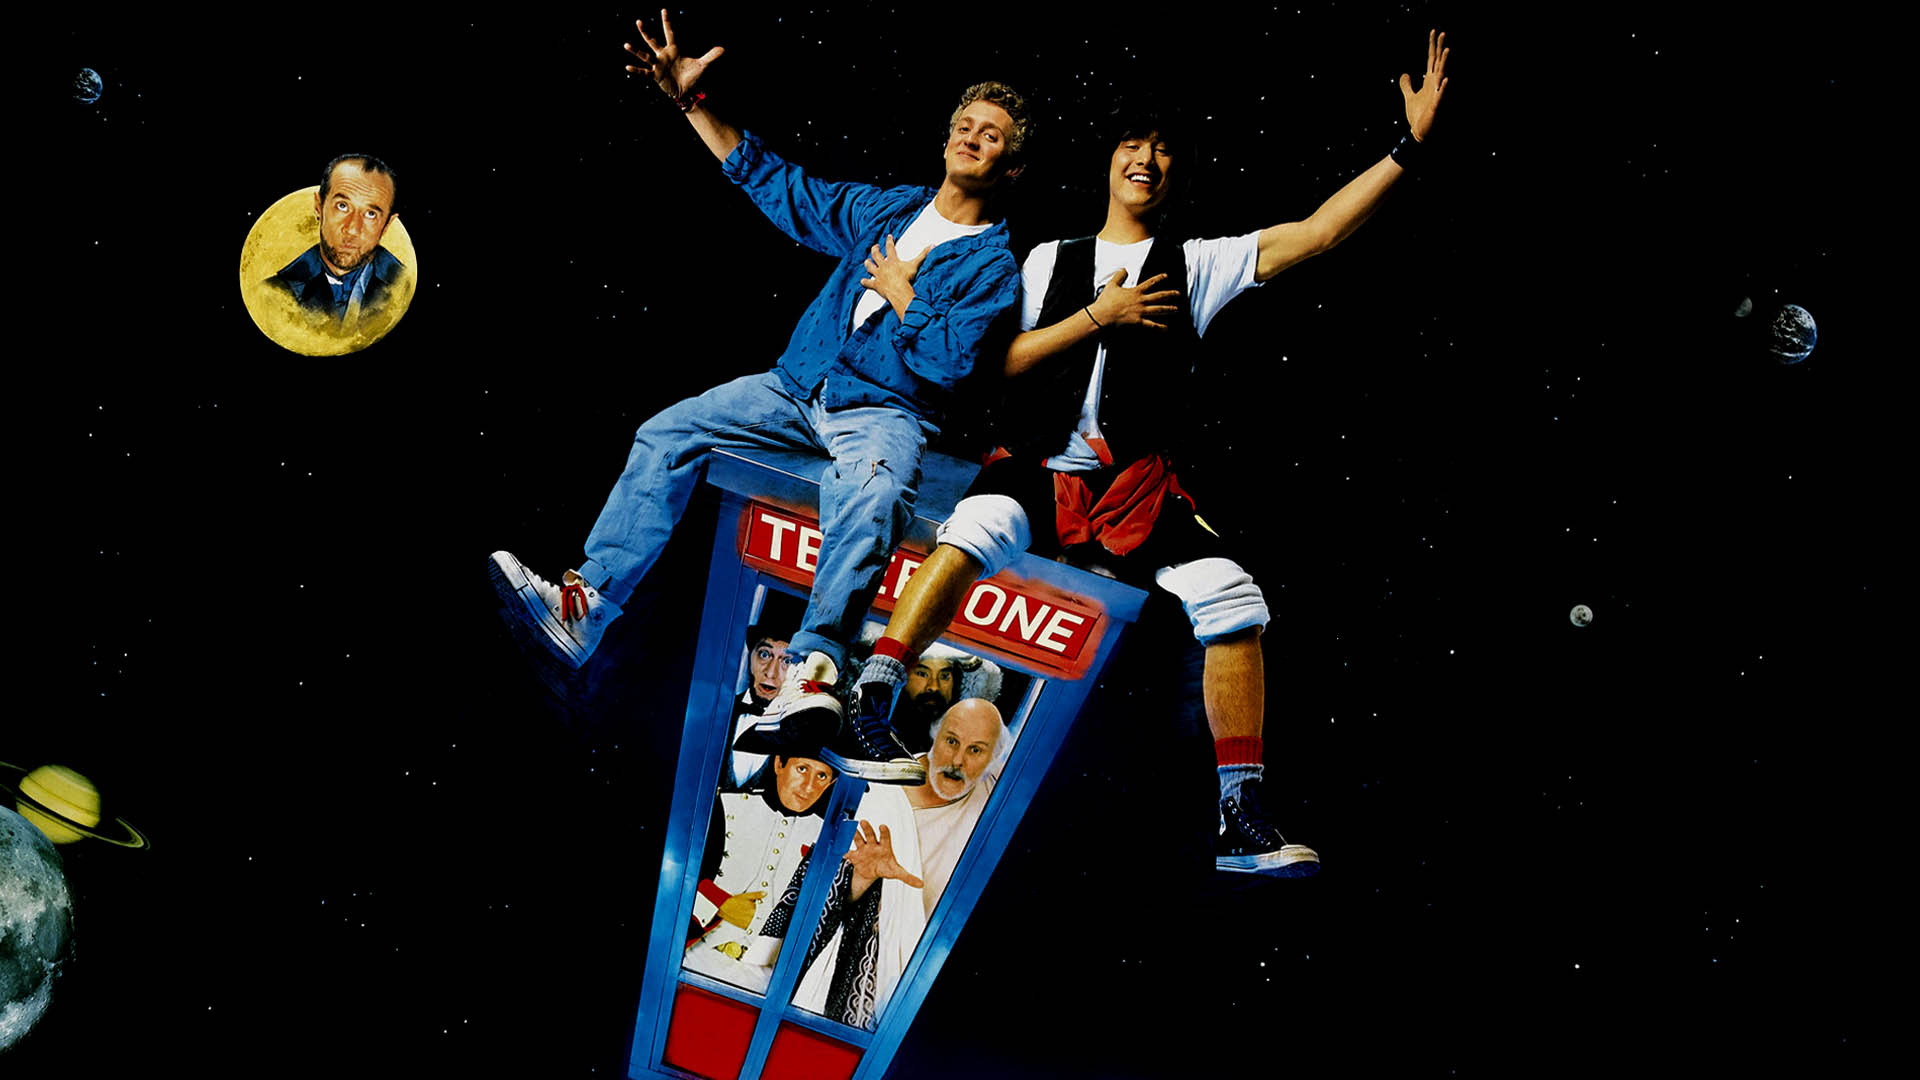 Bill & Ted's Excellent Adventure movie cover with Keanu Reeves and Alex Winter